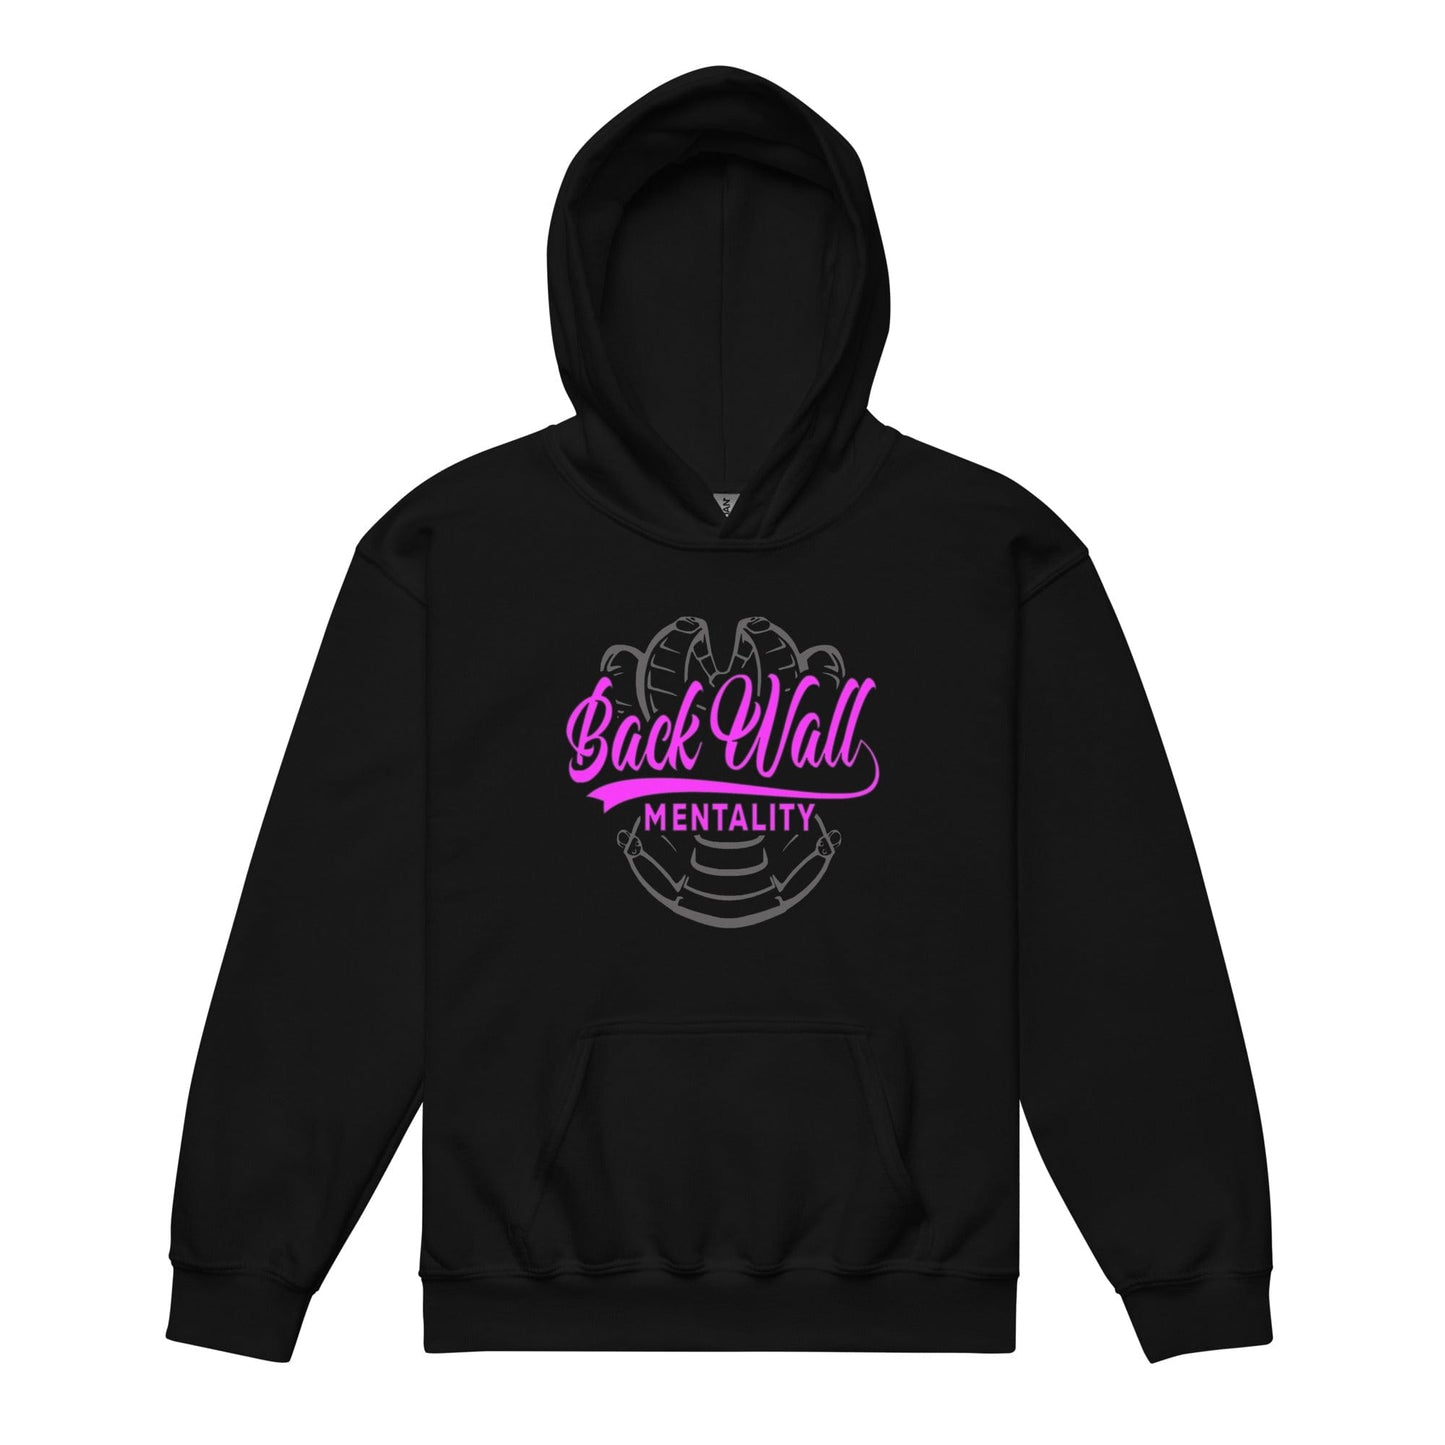 Backwall Mentality Pink - Youth Hoodie